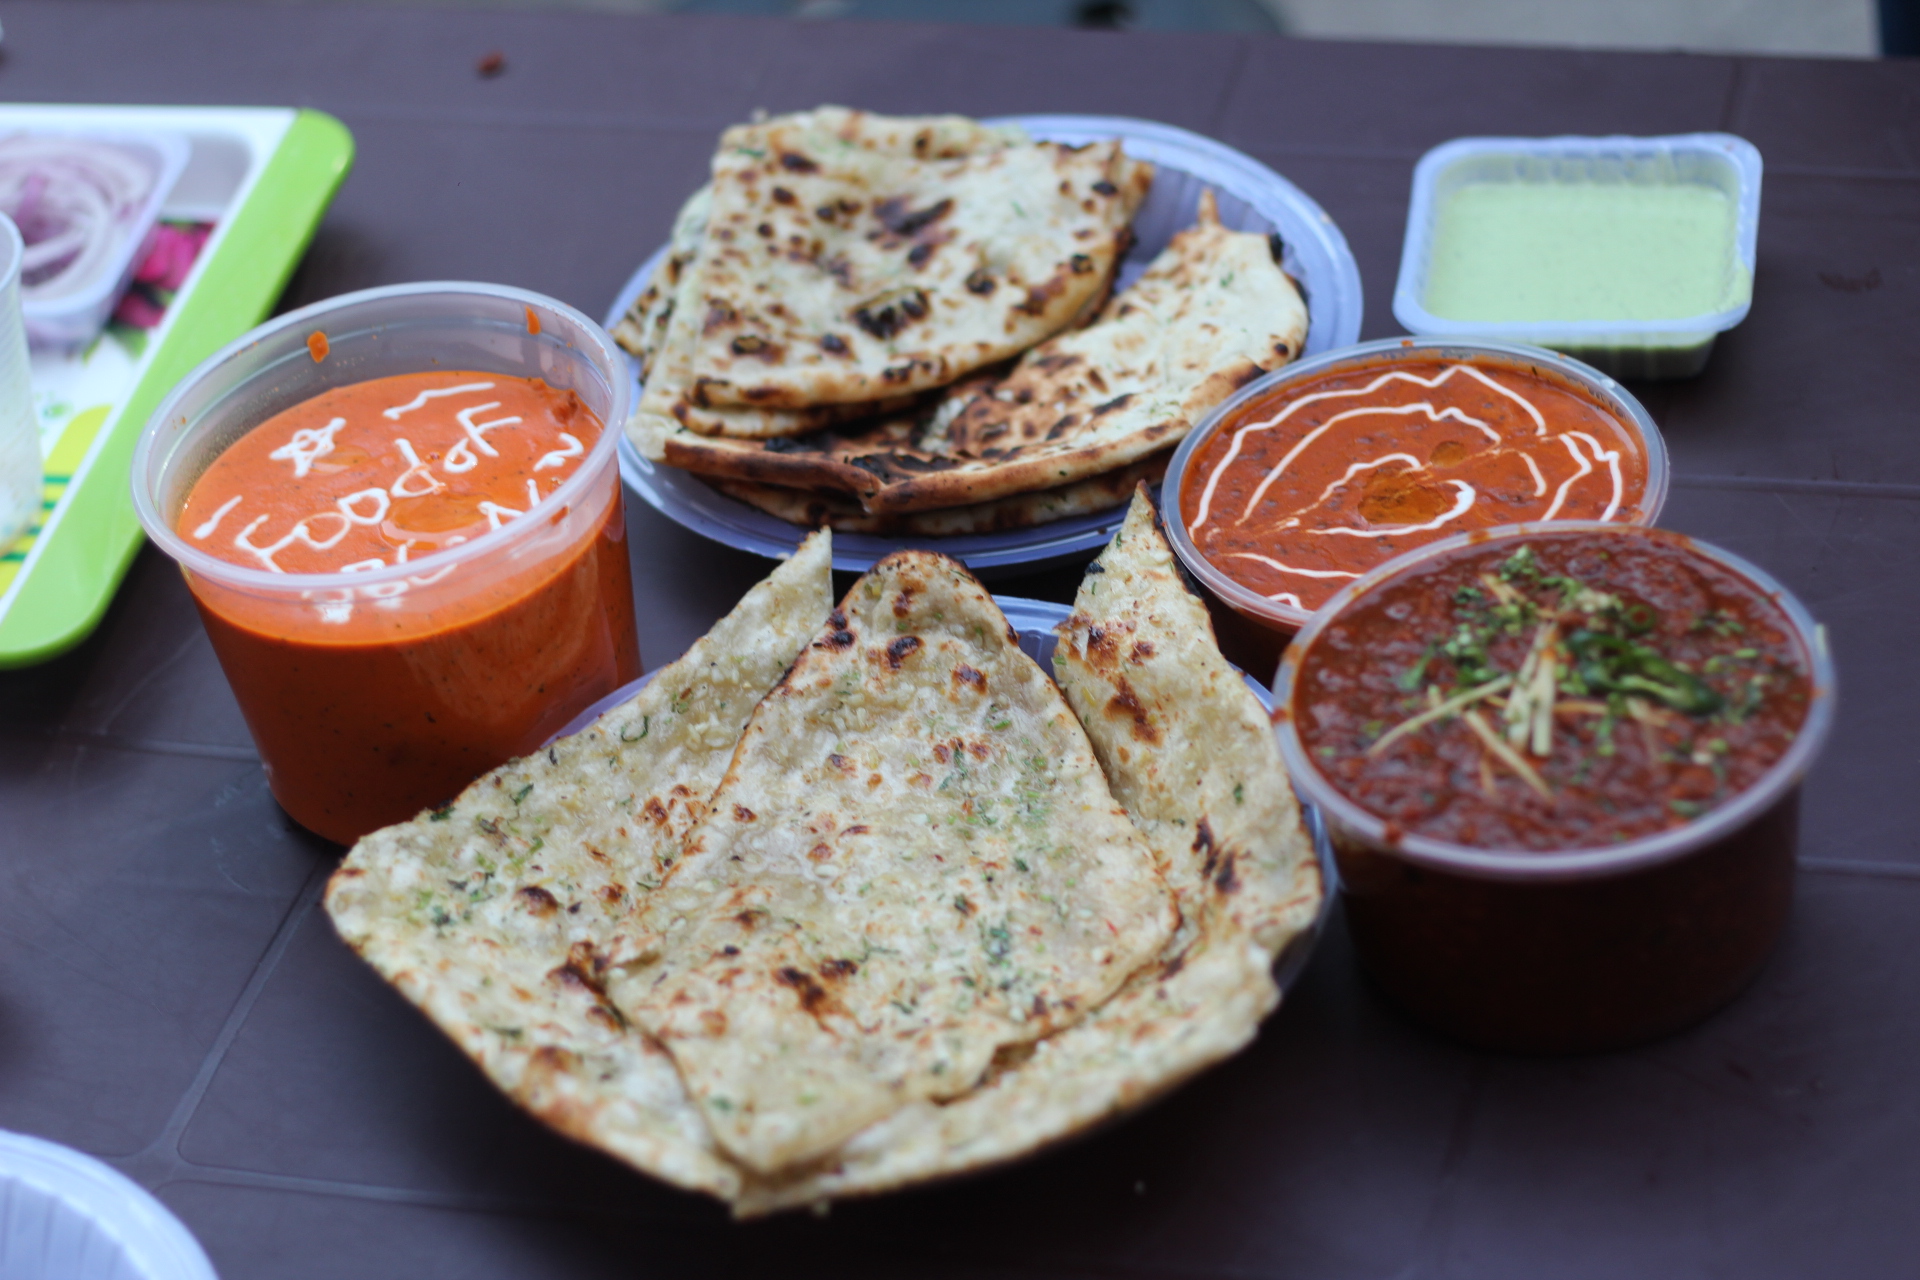 Best North Indian Food Delivery in Delhi? Dilli BC in GK-2 Market